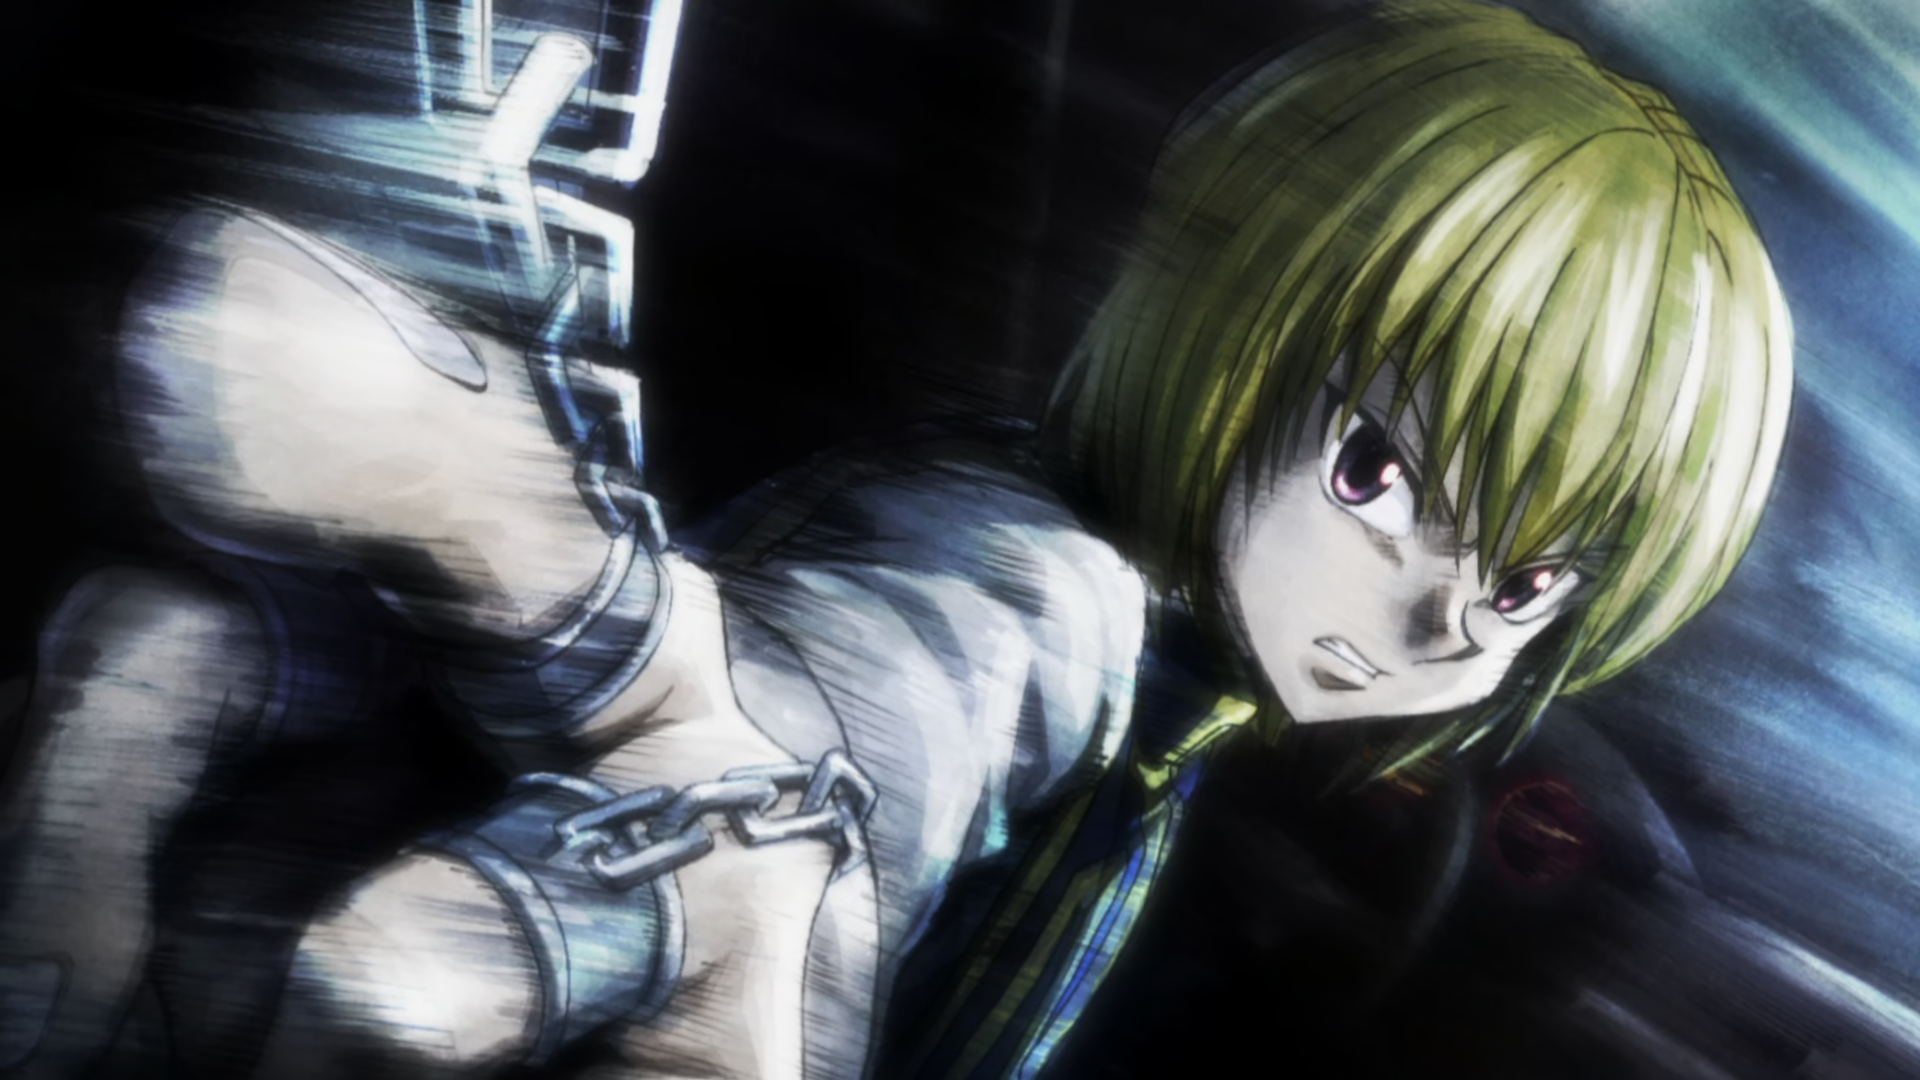 http://images2.wikia.nocookie.net/__cb20120819065722/hunterxhunter/images/1/14/Kurapika_uses_his_chain_on_capturing_Uvogin.png